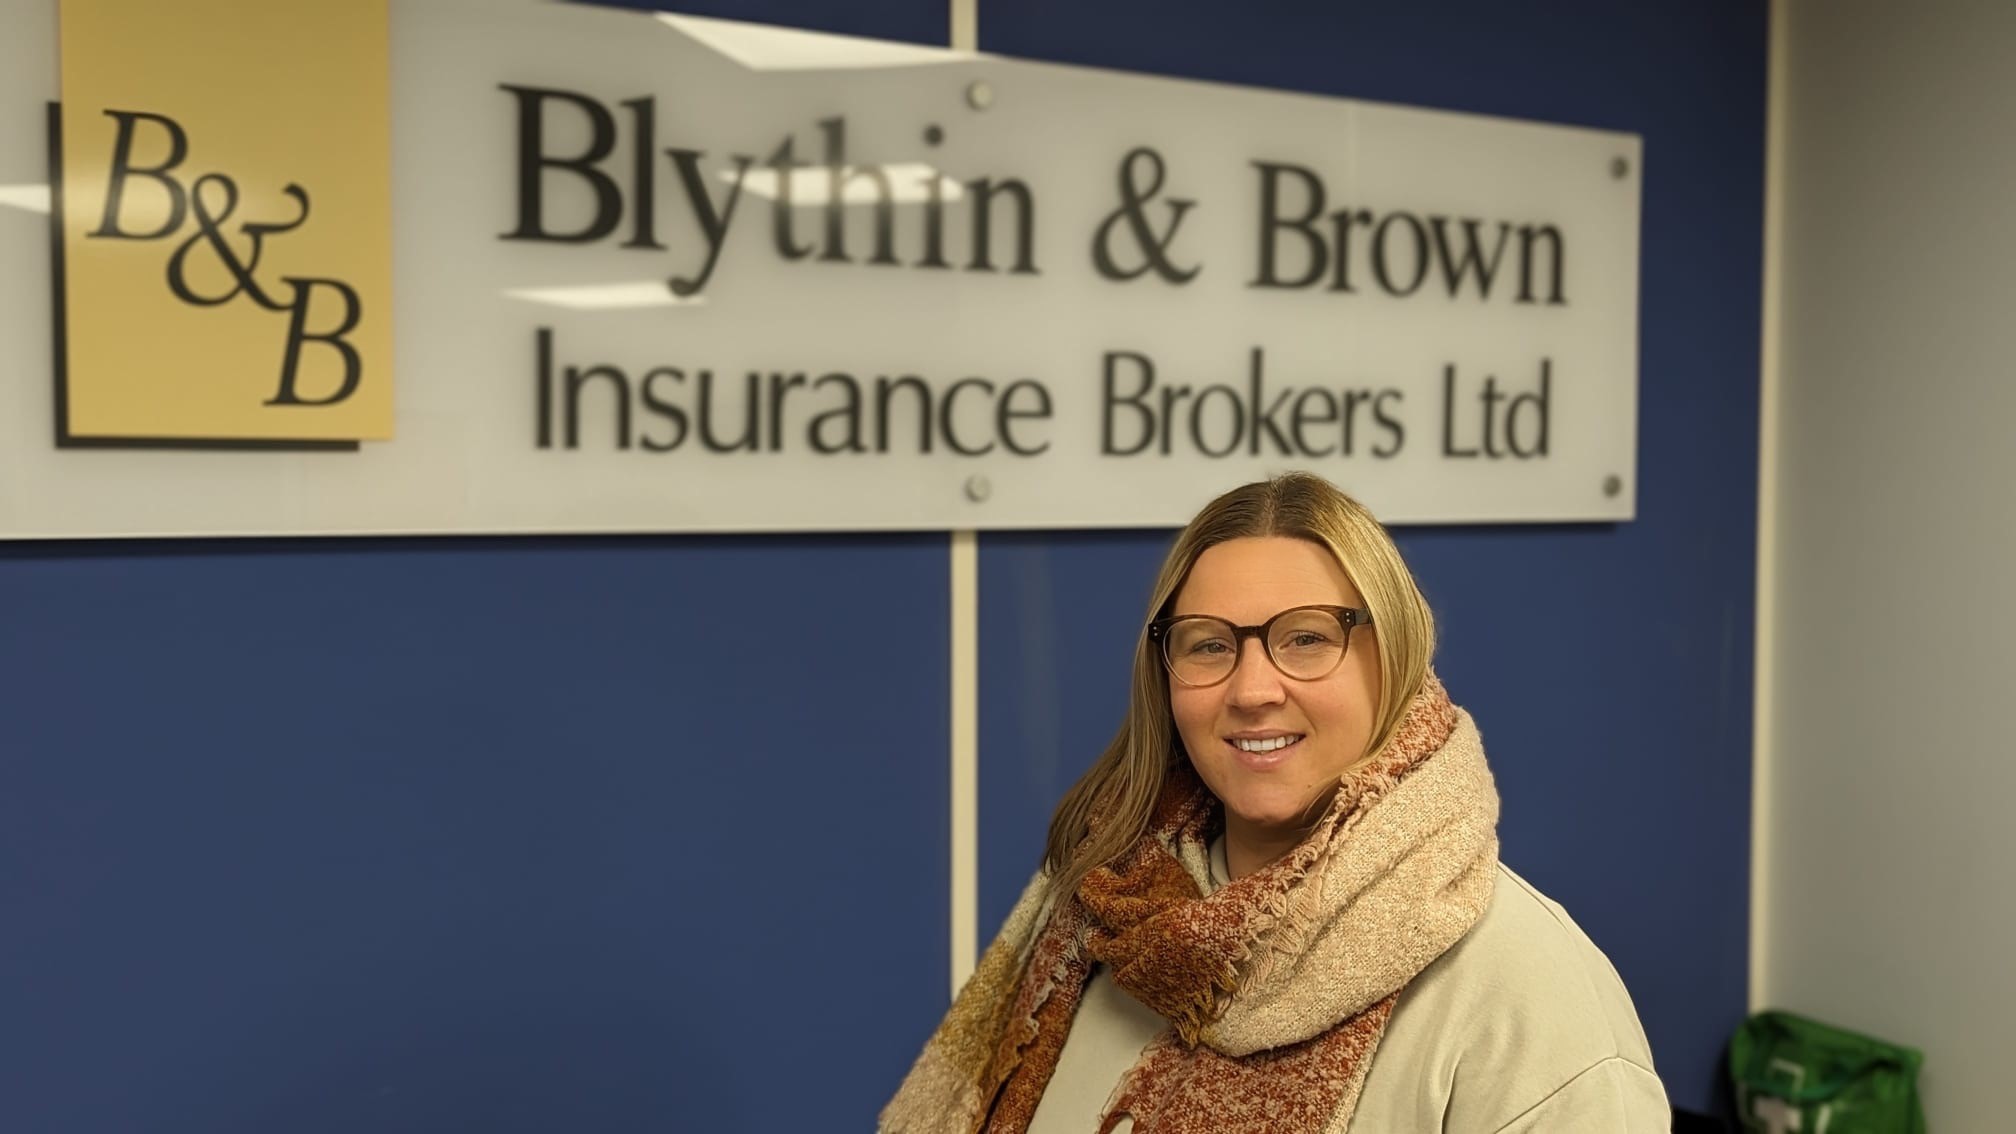 Lucy Herring Blythin & Brown Office Manager